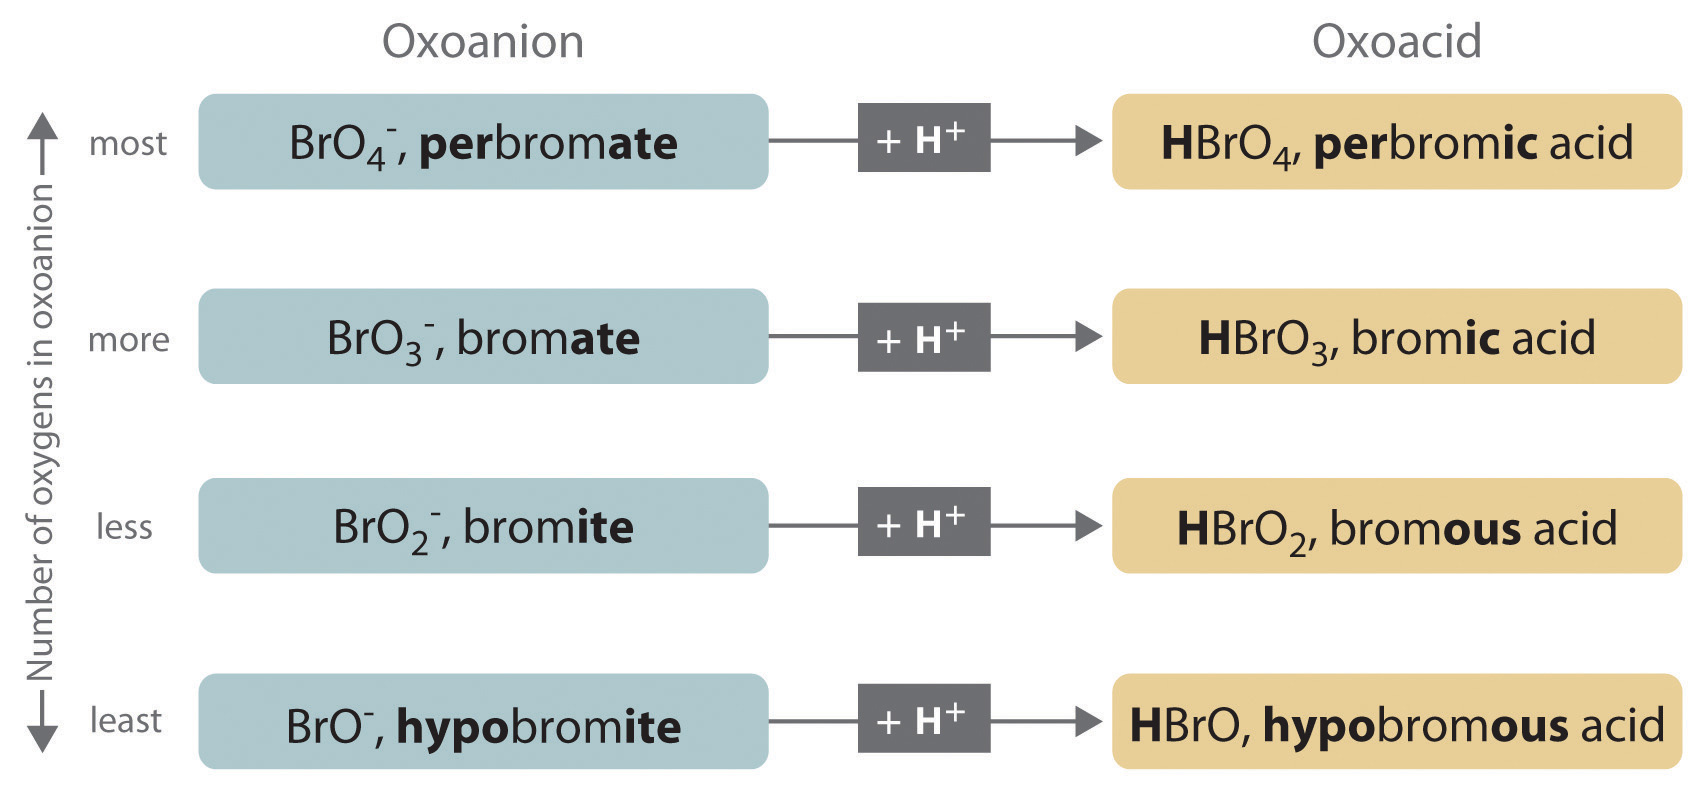 The oxoanions perbromate, bromate, bromite, and hypobromite reacts with hydrogen to form perbromic acid, bromic acid, bromous acid, and hypobromous acid. These are the oxoacid forms.